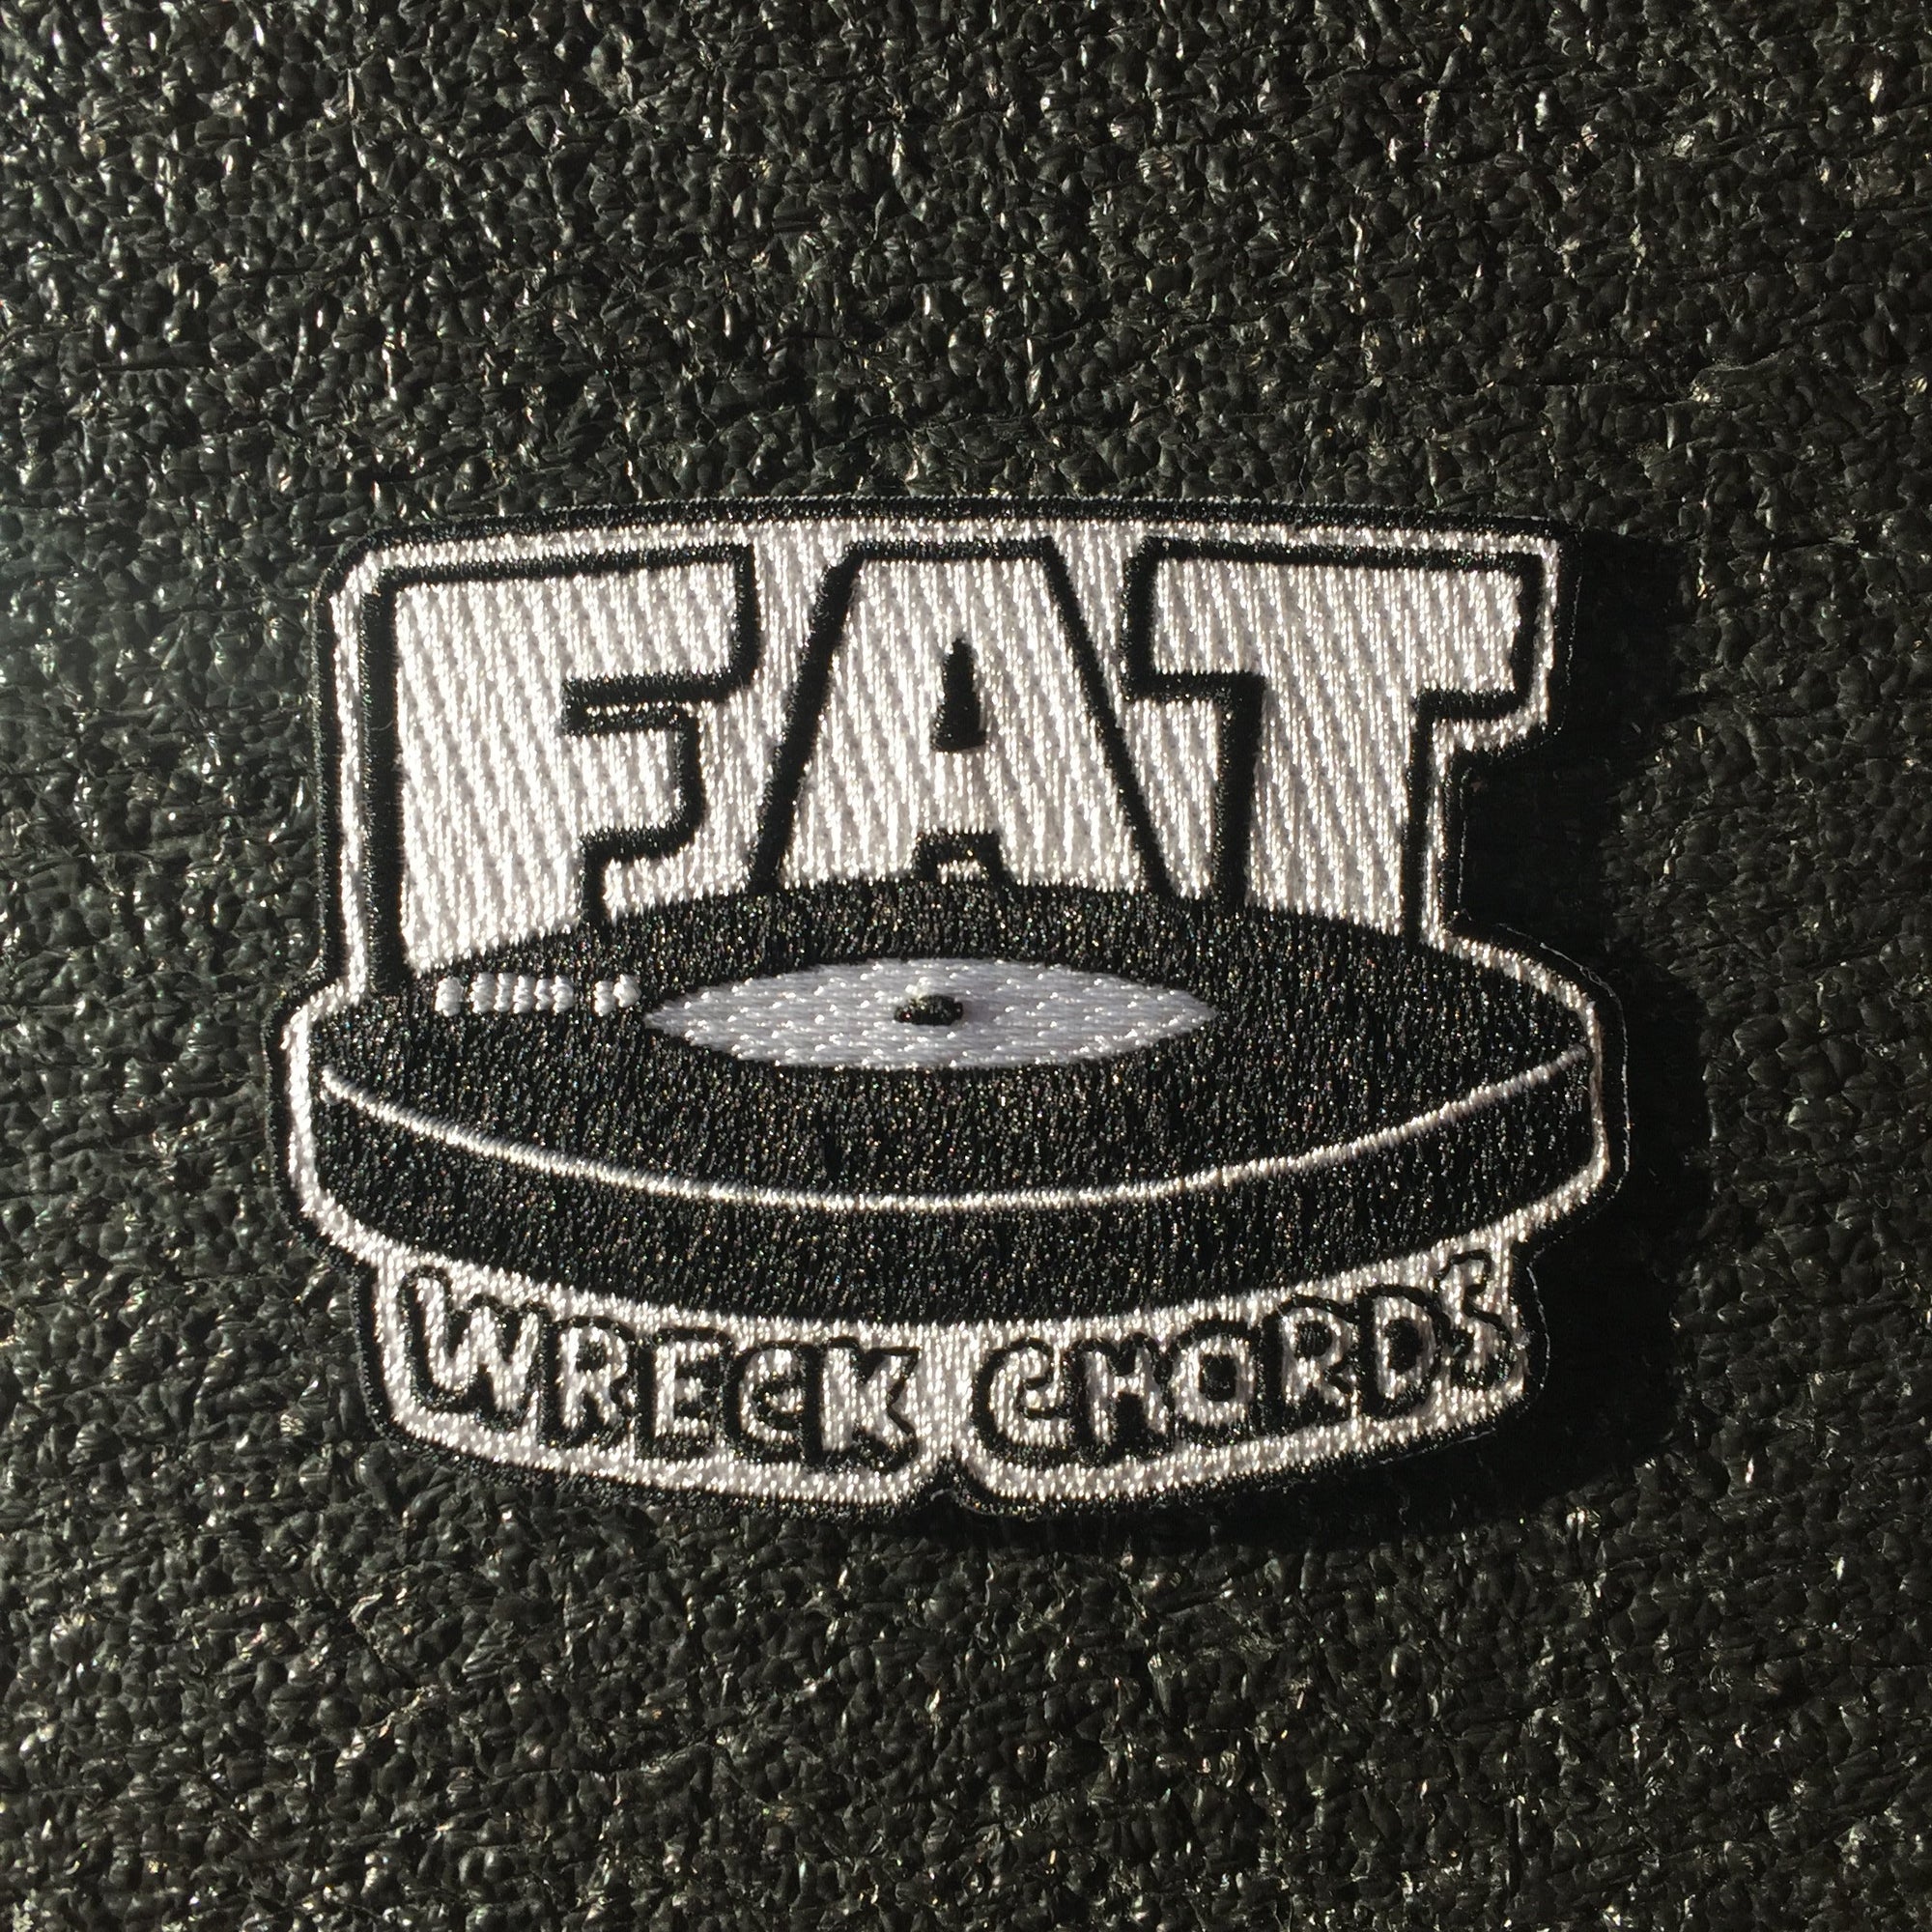 Fat Wreck Chords Patch